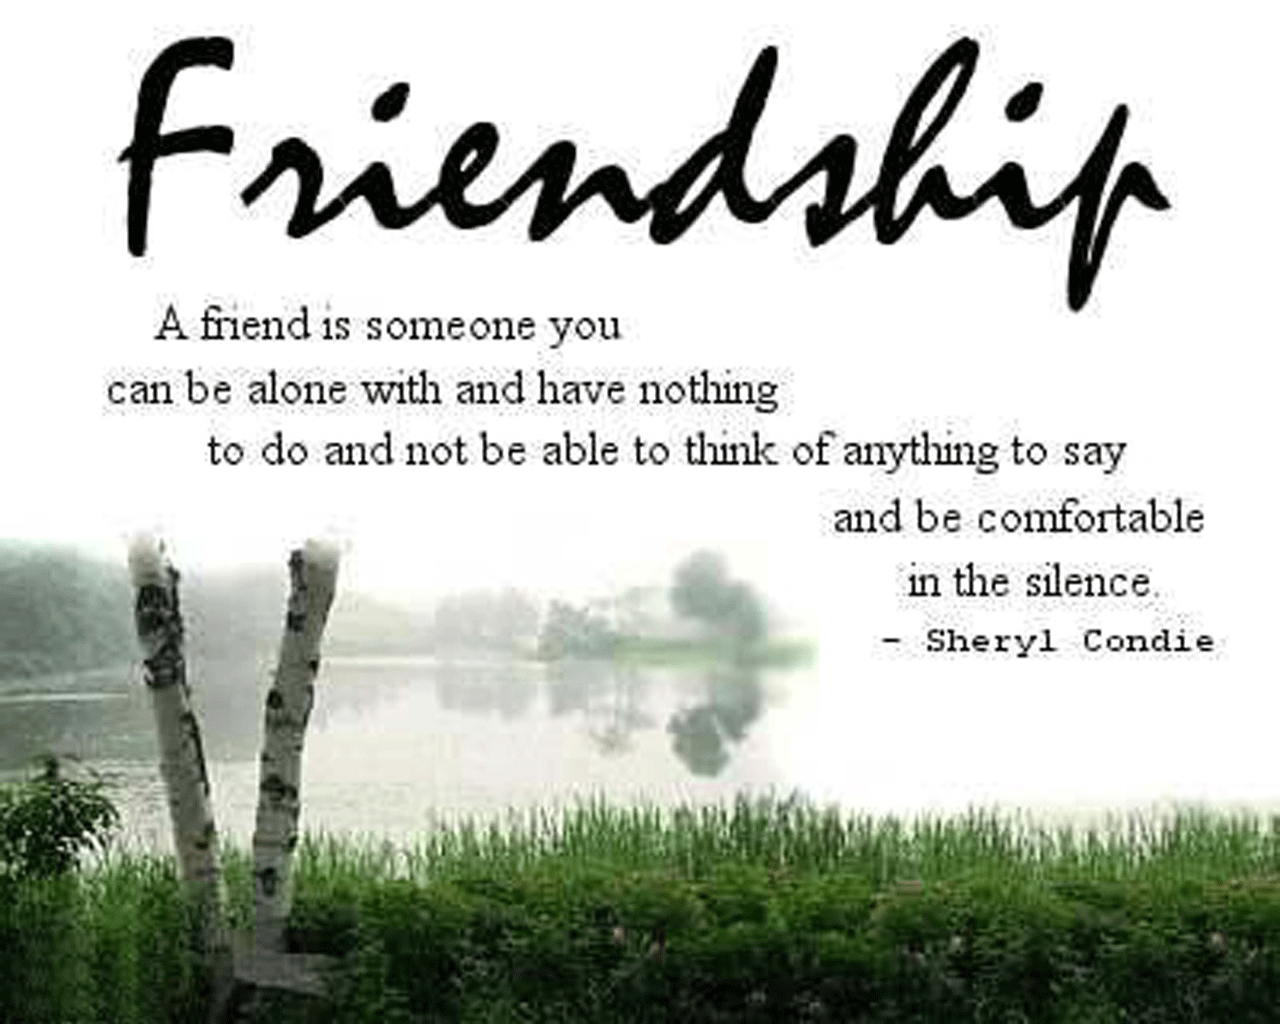 Friendship HD Wallpaper Quotes 2015. Nation of Friendships